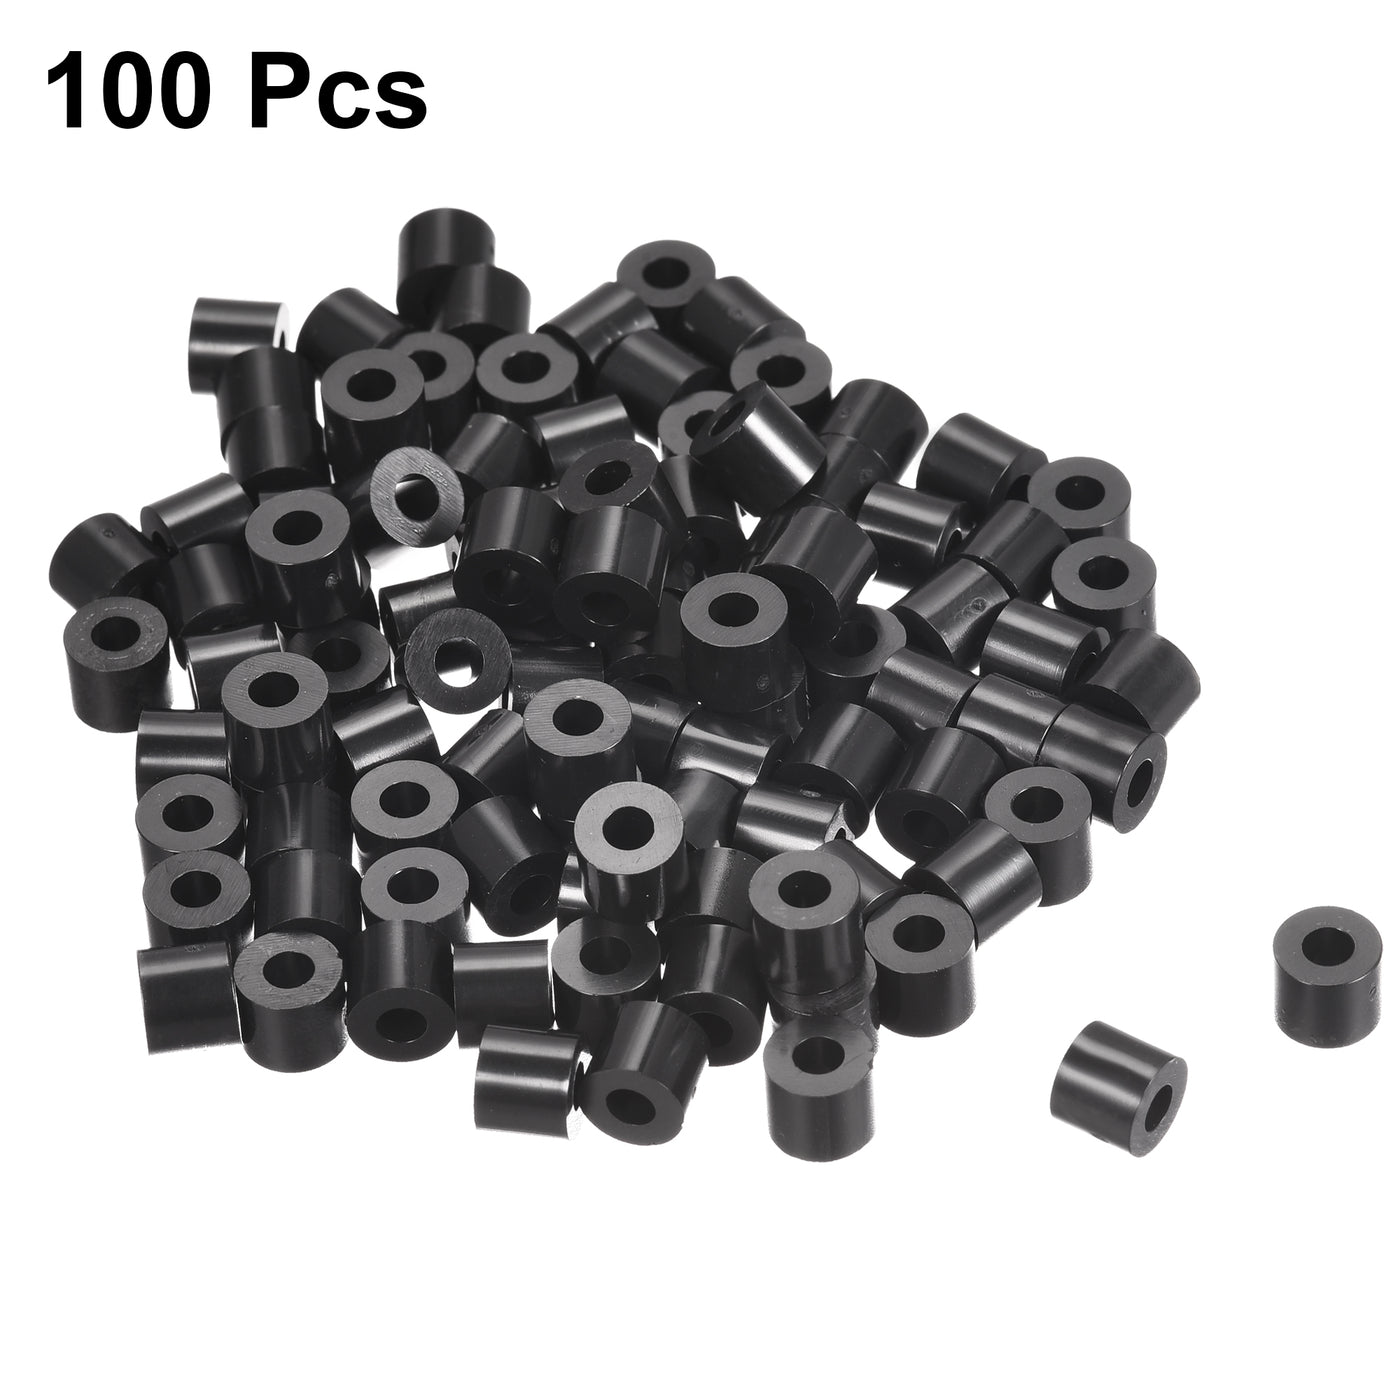 uxcell Uxcell Nylon Round Spacer Washer 3.2mmx7mmx6mm for M3 Screws Black 100Pcs